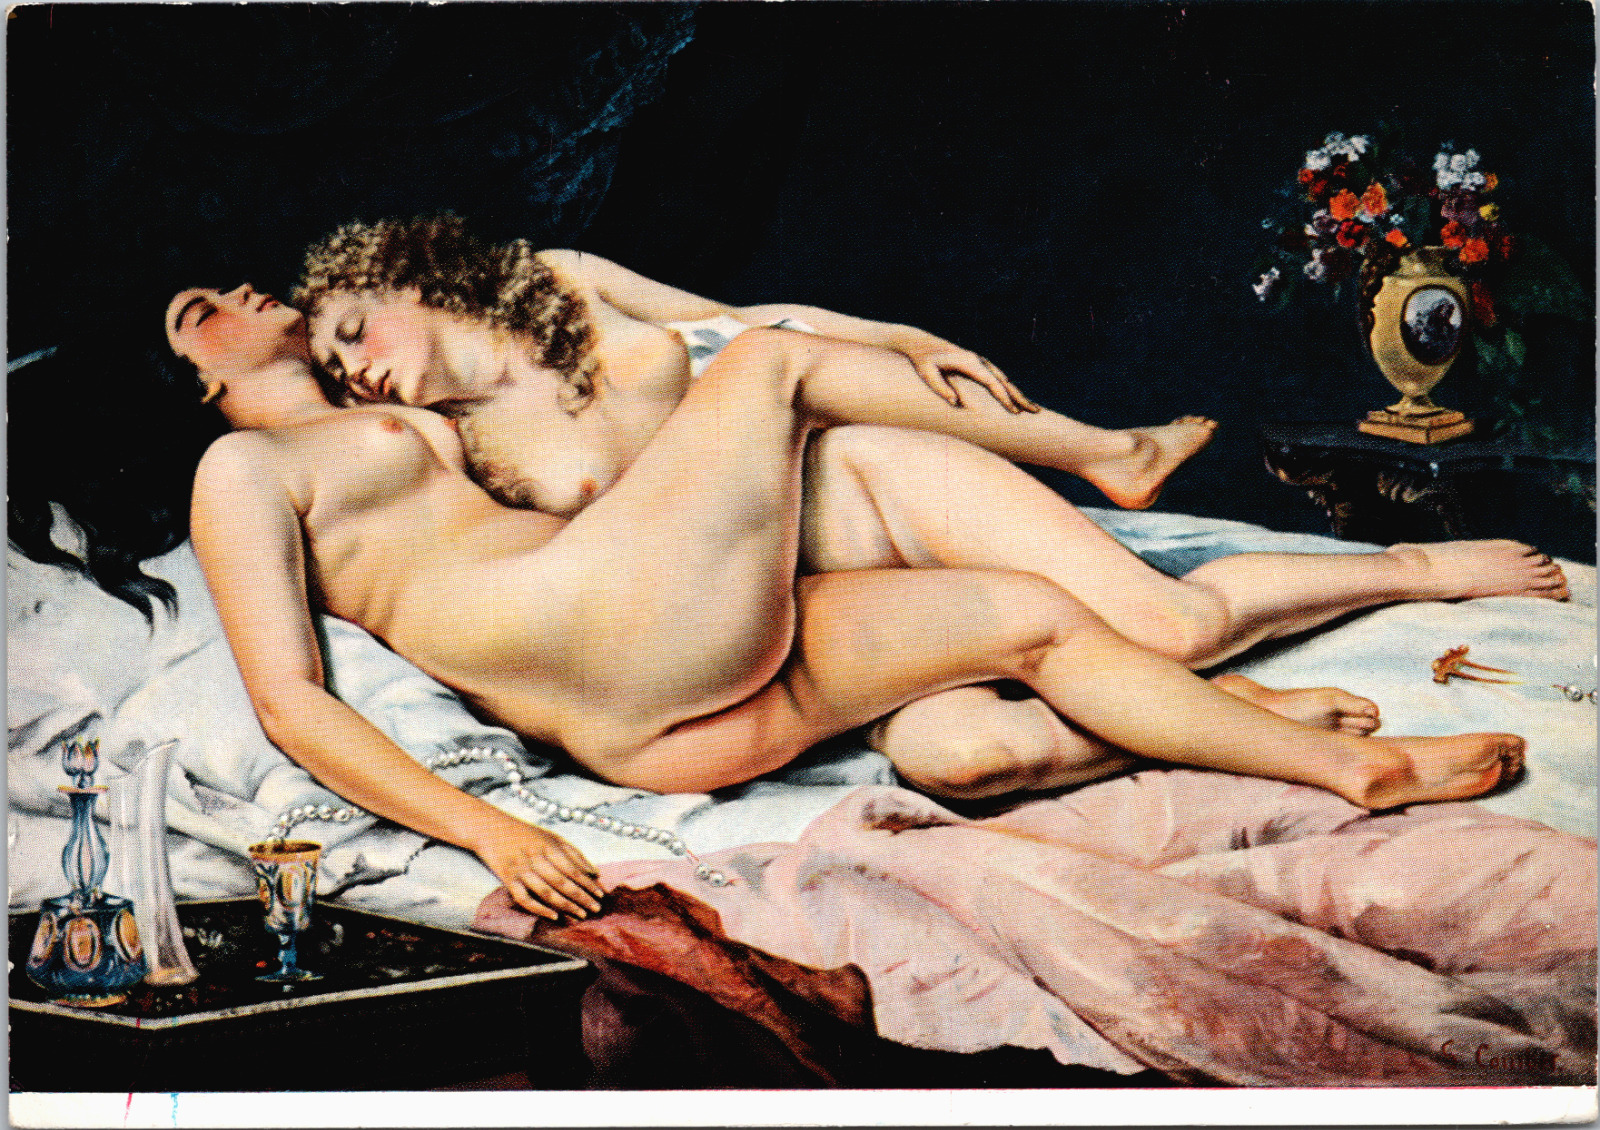 1866 Young Nude Lesbian Couple Sleeping Bed Gustave Courbet Art Postcard UNP